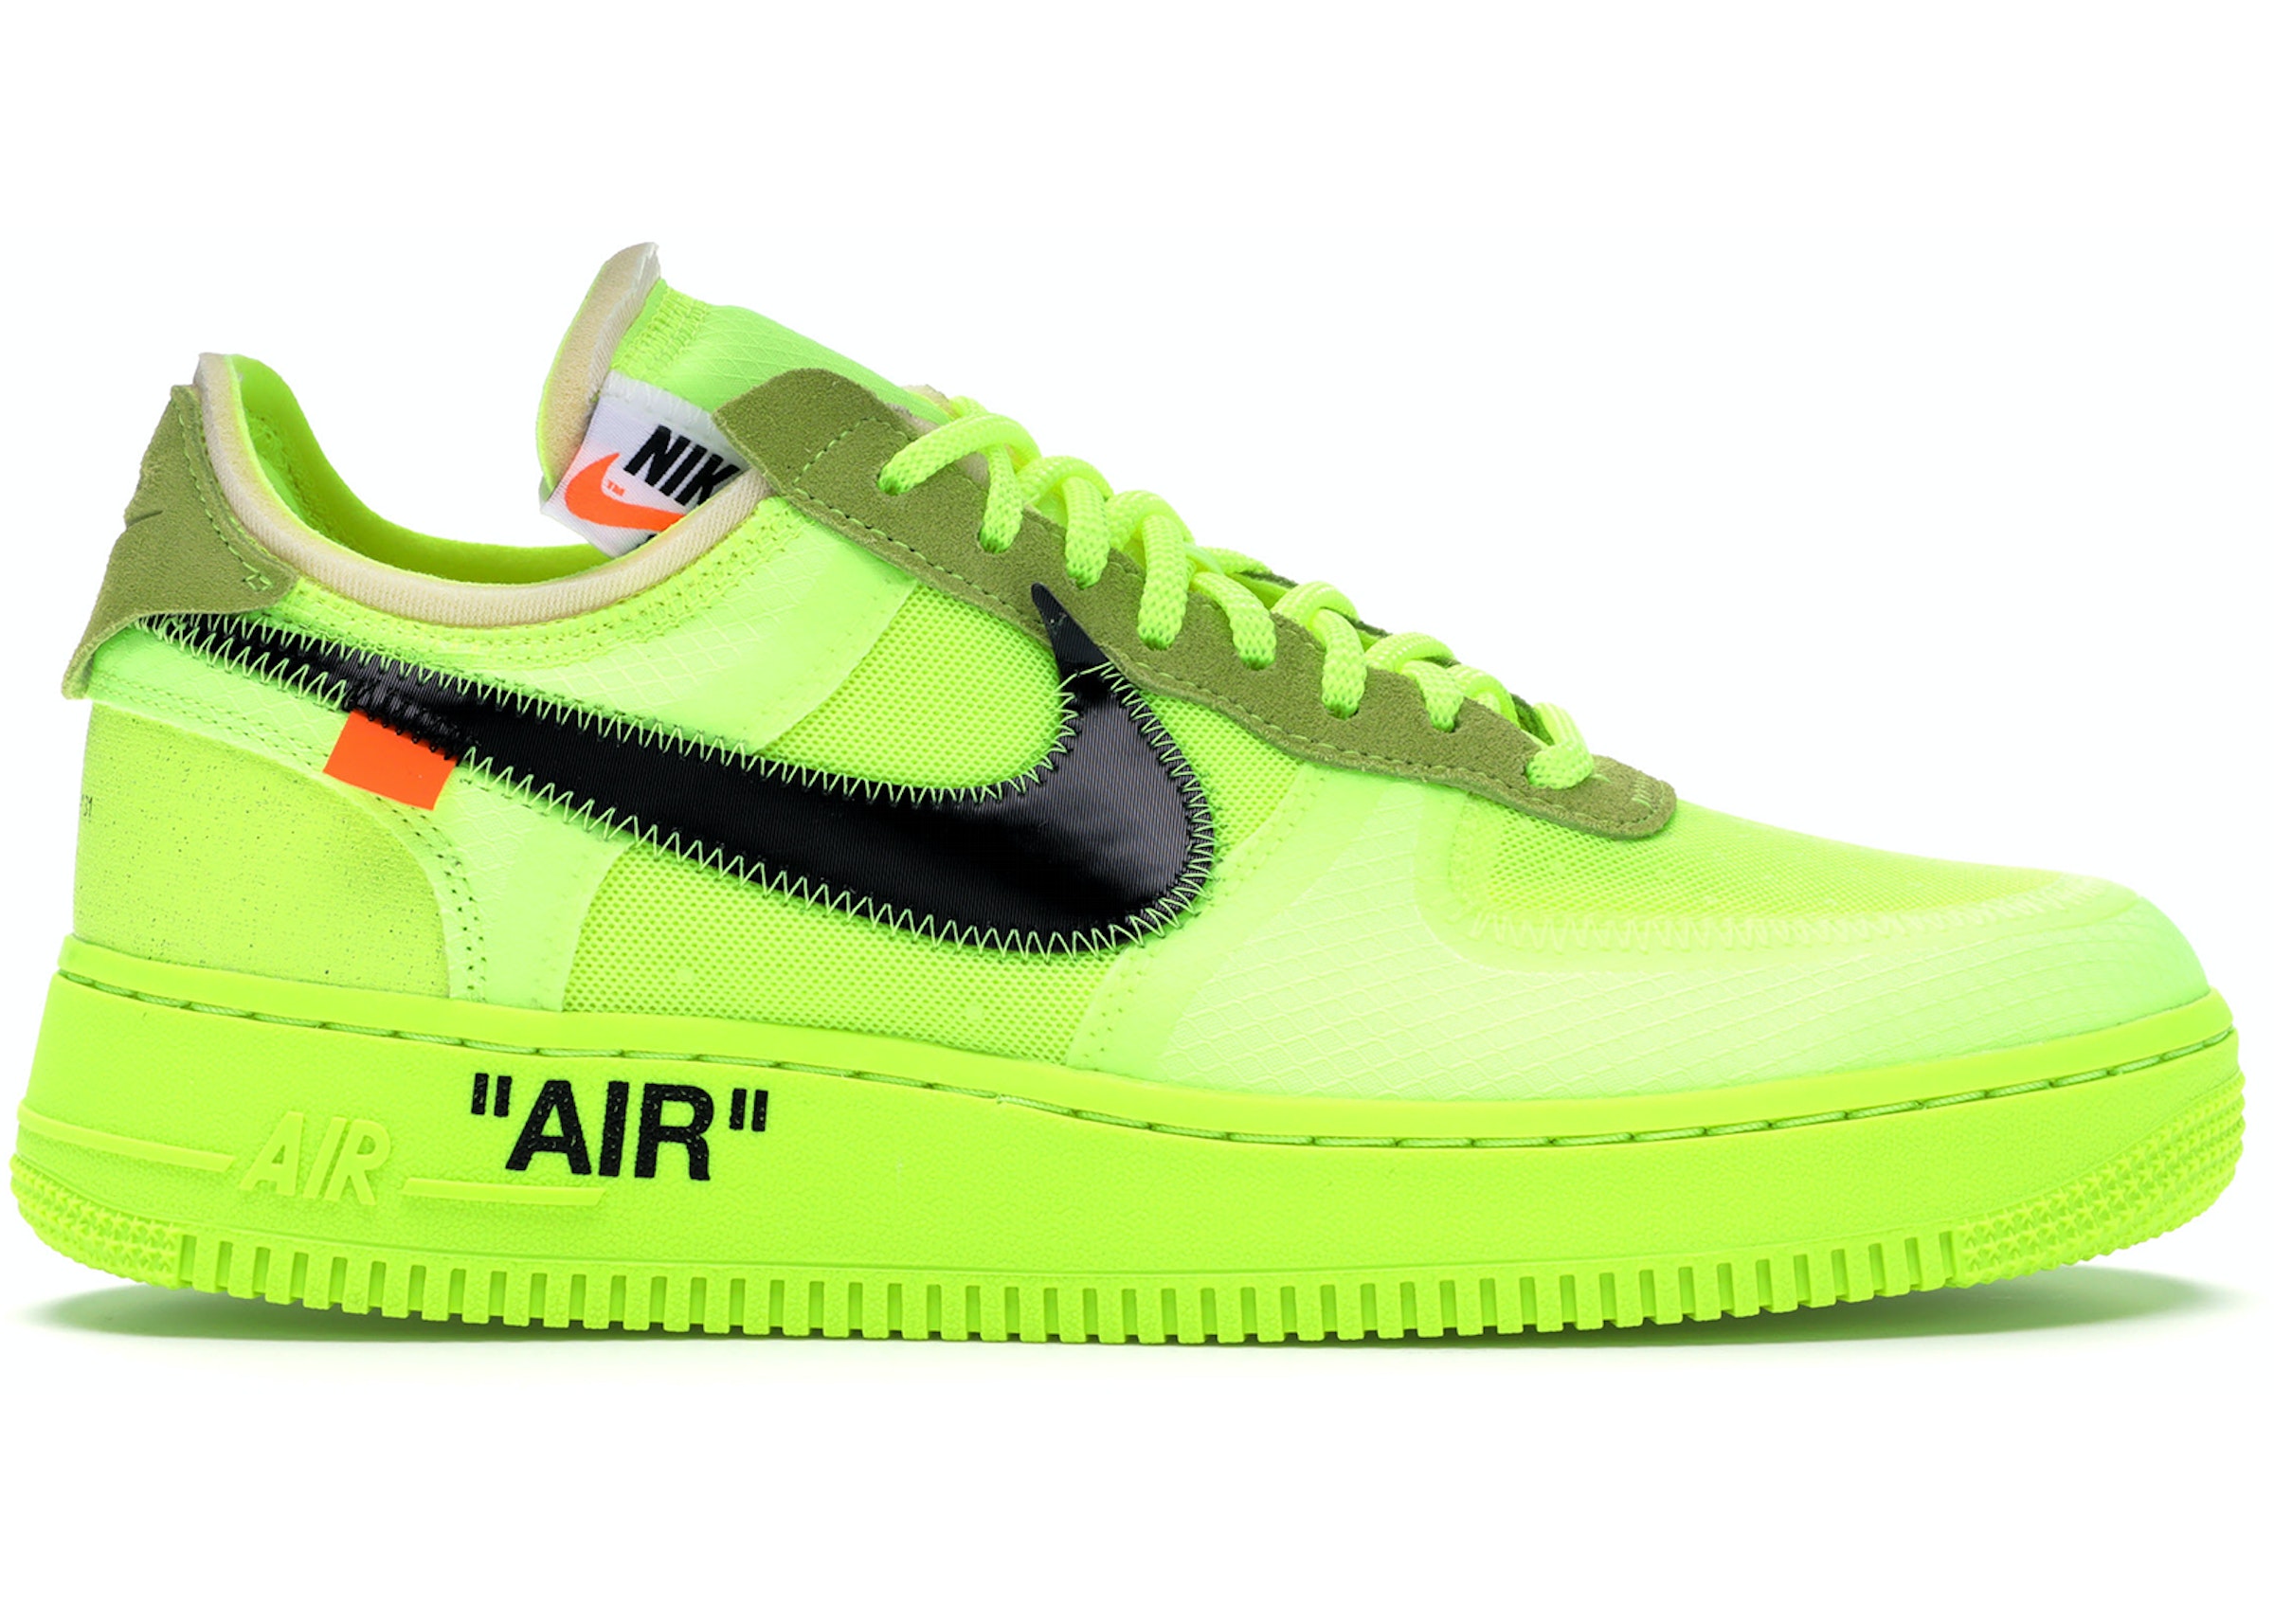 Air 1 Low Off-White Volt - AO4606-700 - US